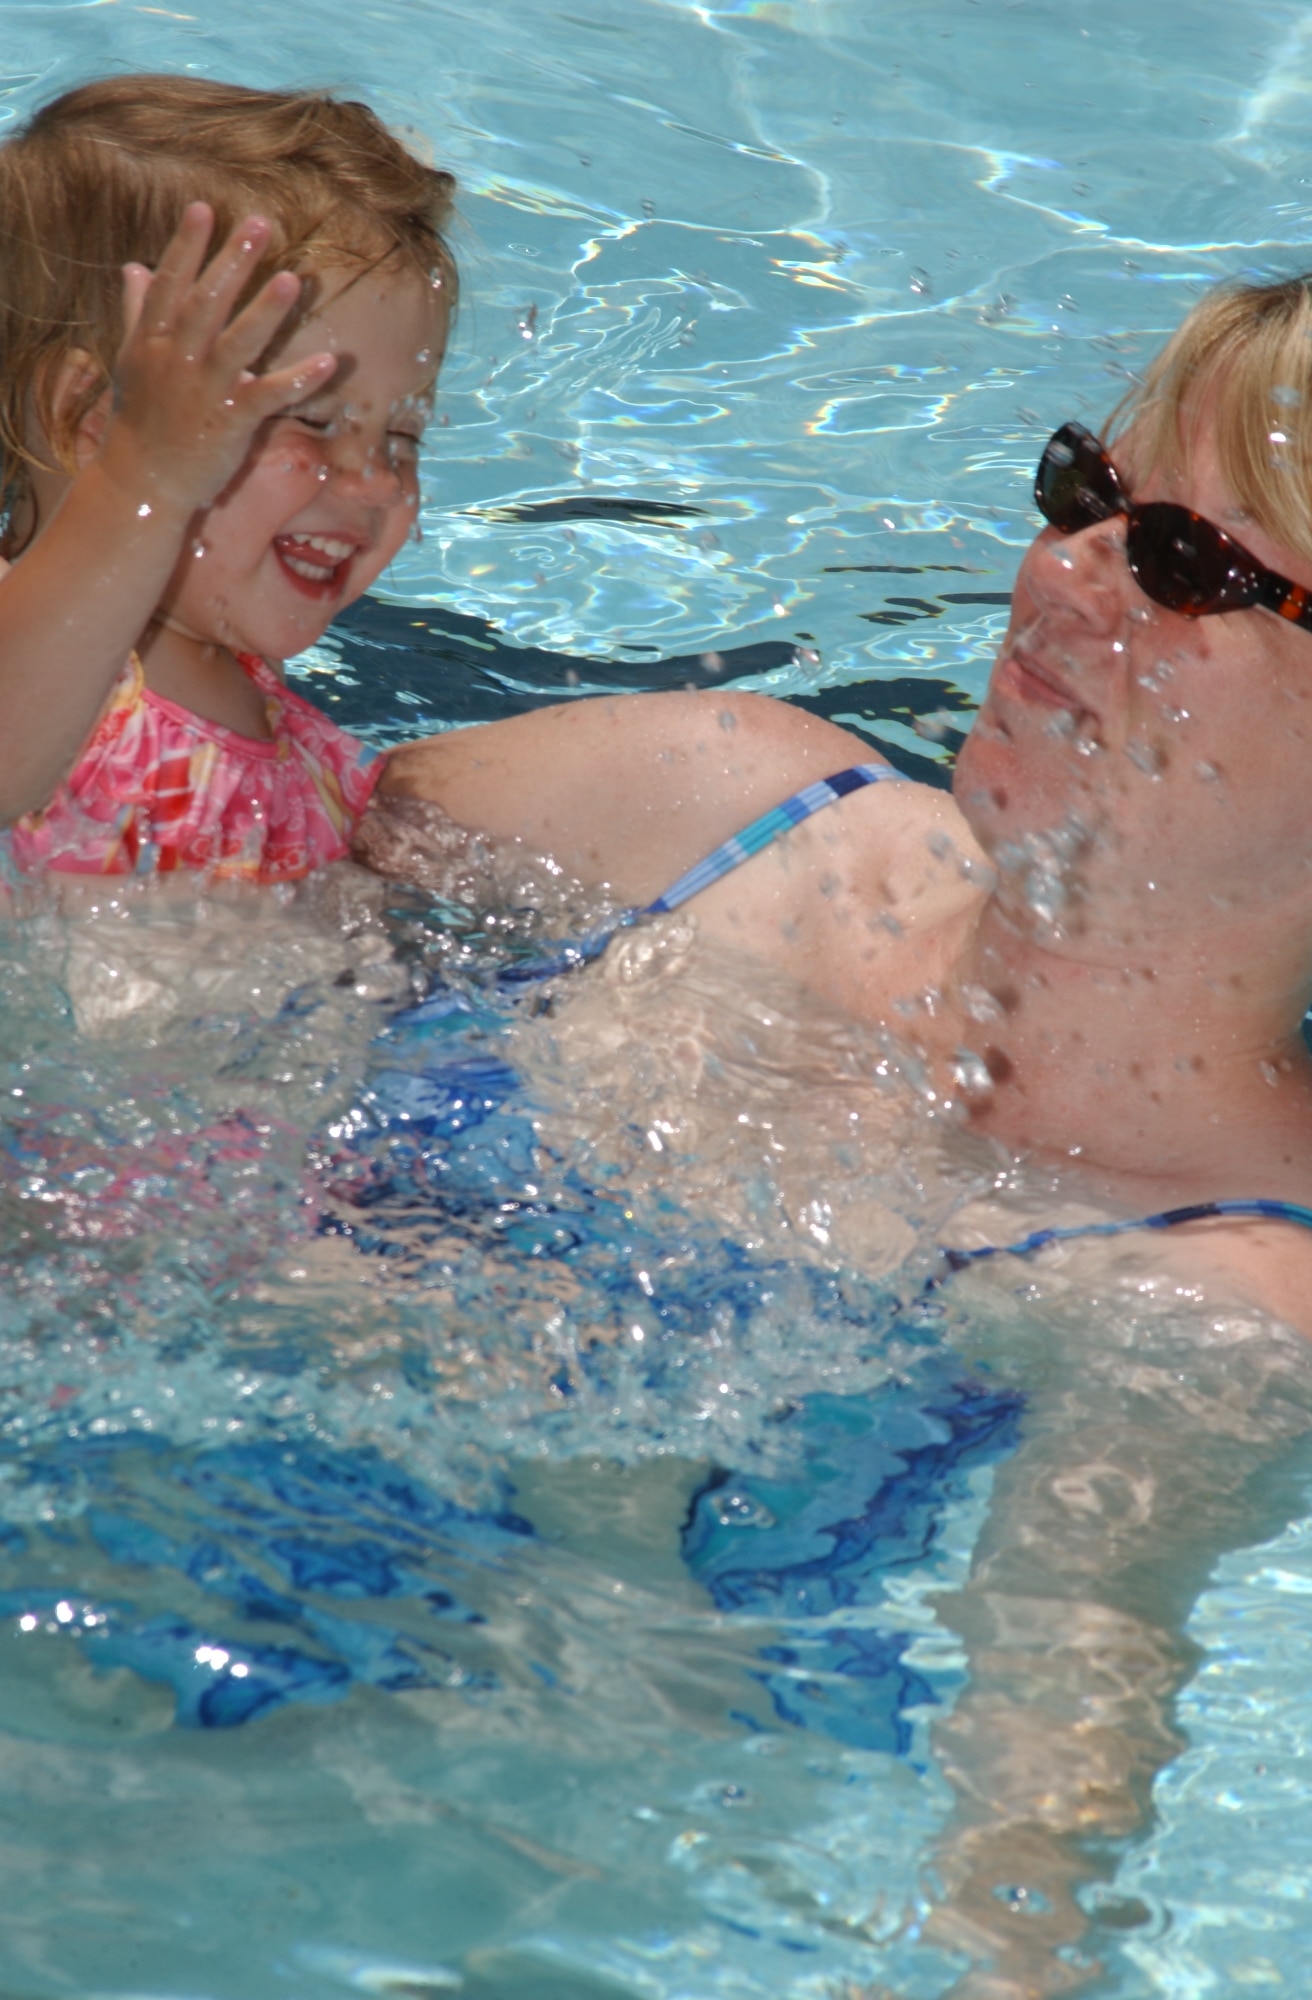 Two-year-old Kady Heverly, left, and her mother, Lisa Heverly, 81st Medical Operations Squadron, enjoy themselves at the main base pool June 8.  Keesler has two pools.  The main base pool is open noon to 5:30 p.m daily except Mondays.  The Triangle pool is open noon to 7 p.m. but is closed Wednesdays.  (U. S. Air Force photo by Kemberly Groue)